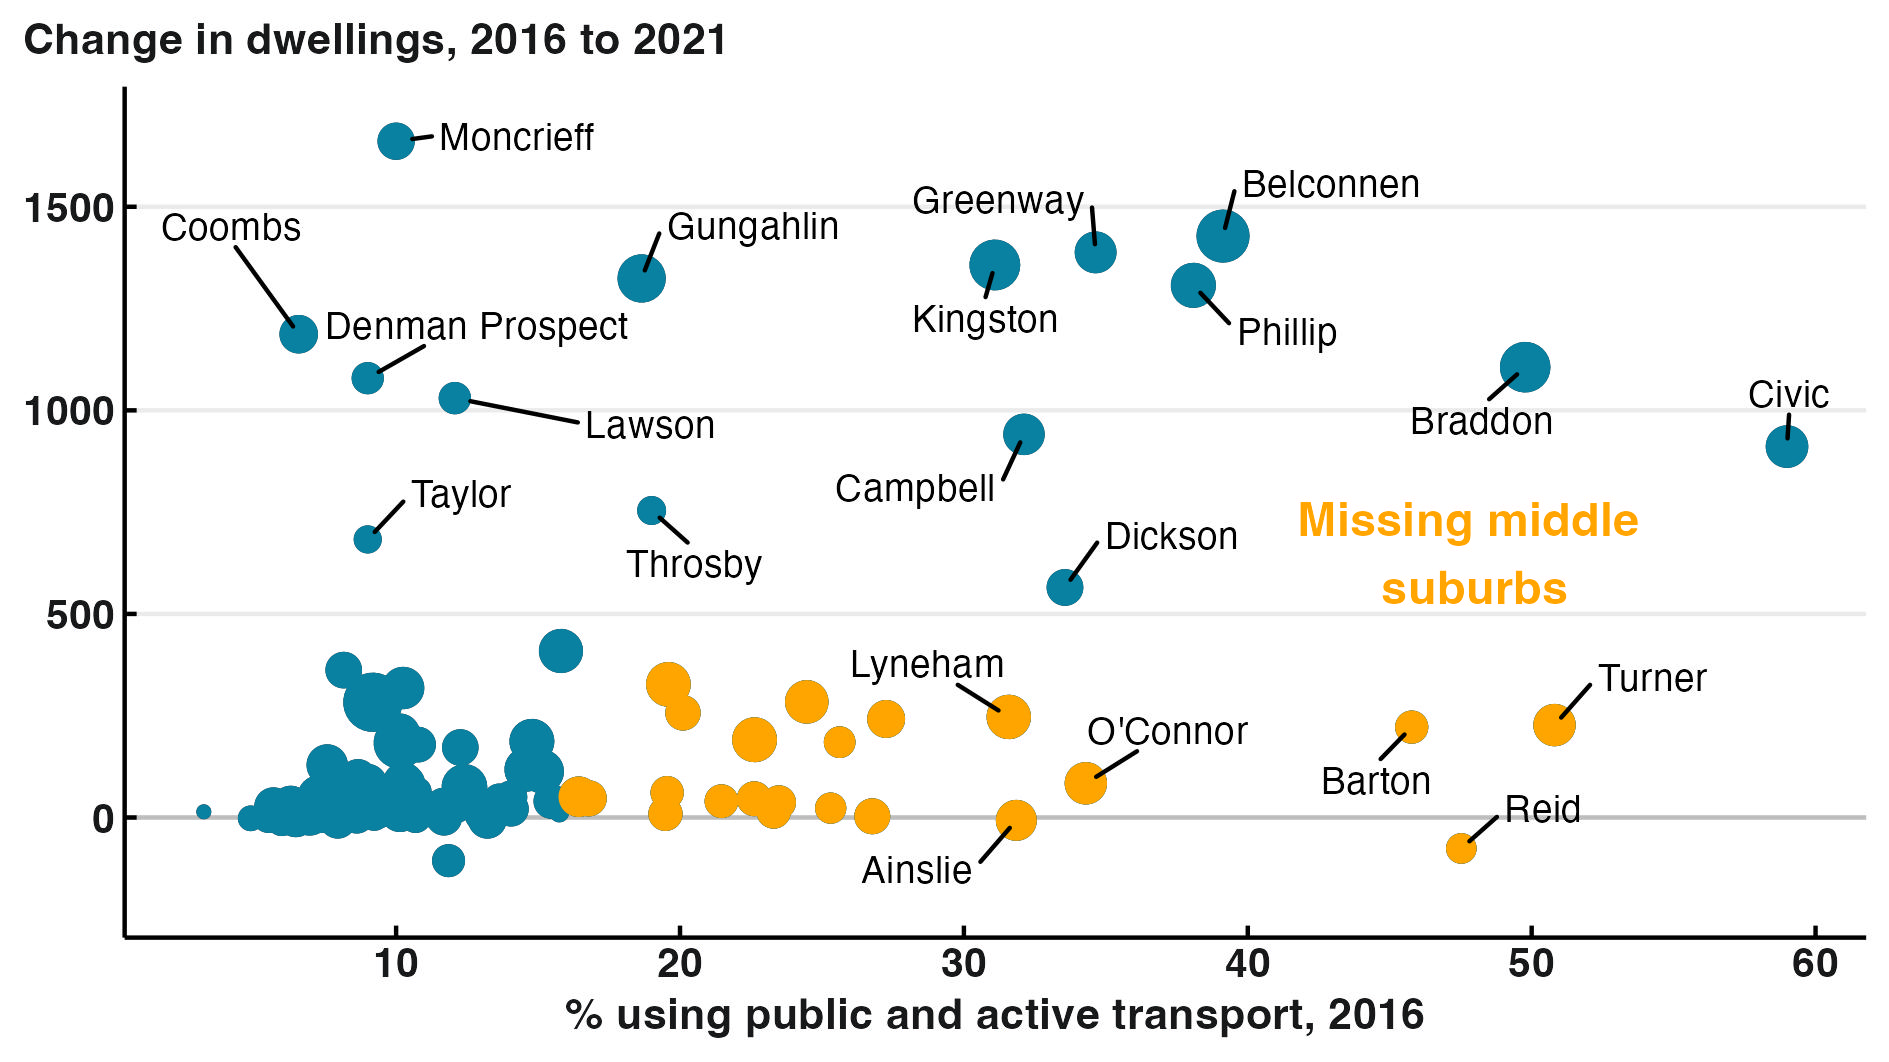 Chart showing distribution of homes built between 2016 and 2021 by ACT suburb on the y axis, and the share of public and active transport use on the x axis. A number of missing middle suburbs with high clean transport use but low housing supply are highlighted.